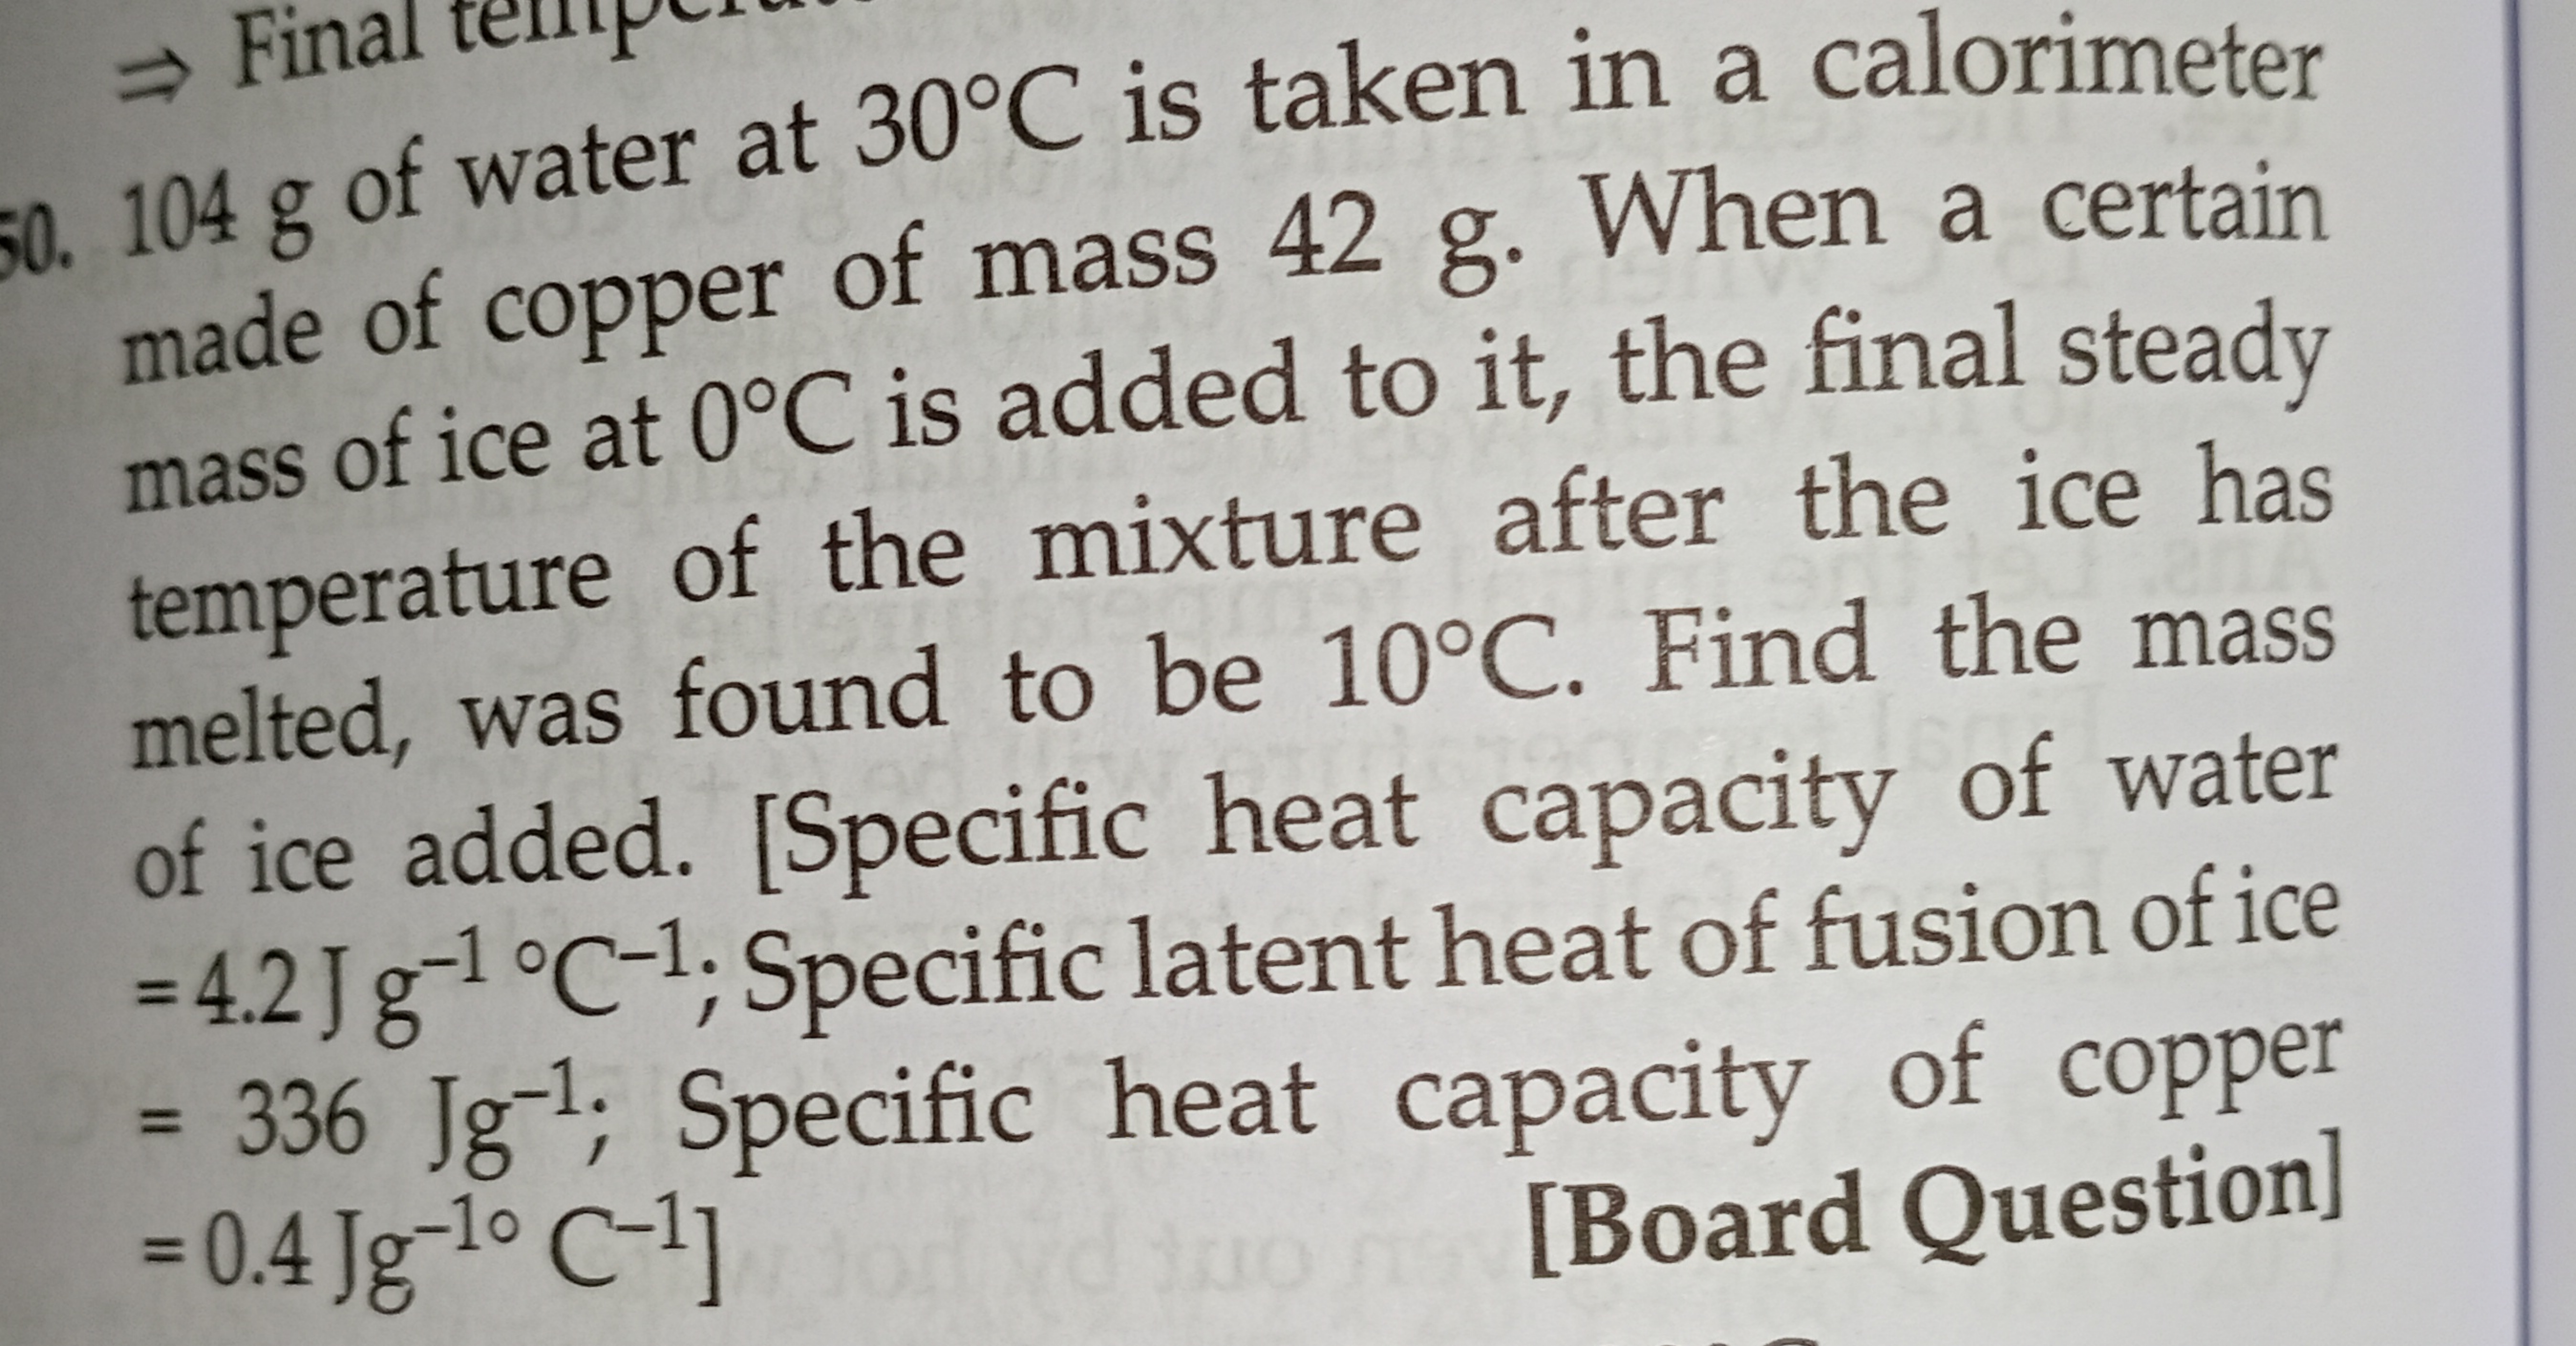 50. 104 g of water at 30∘C is taken in a calorimeter made of copper of